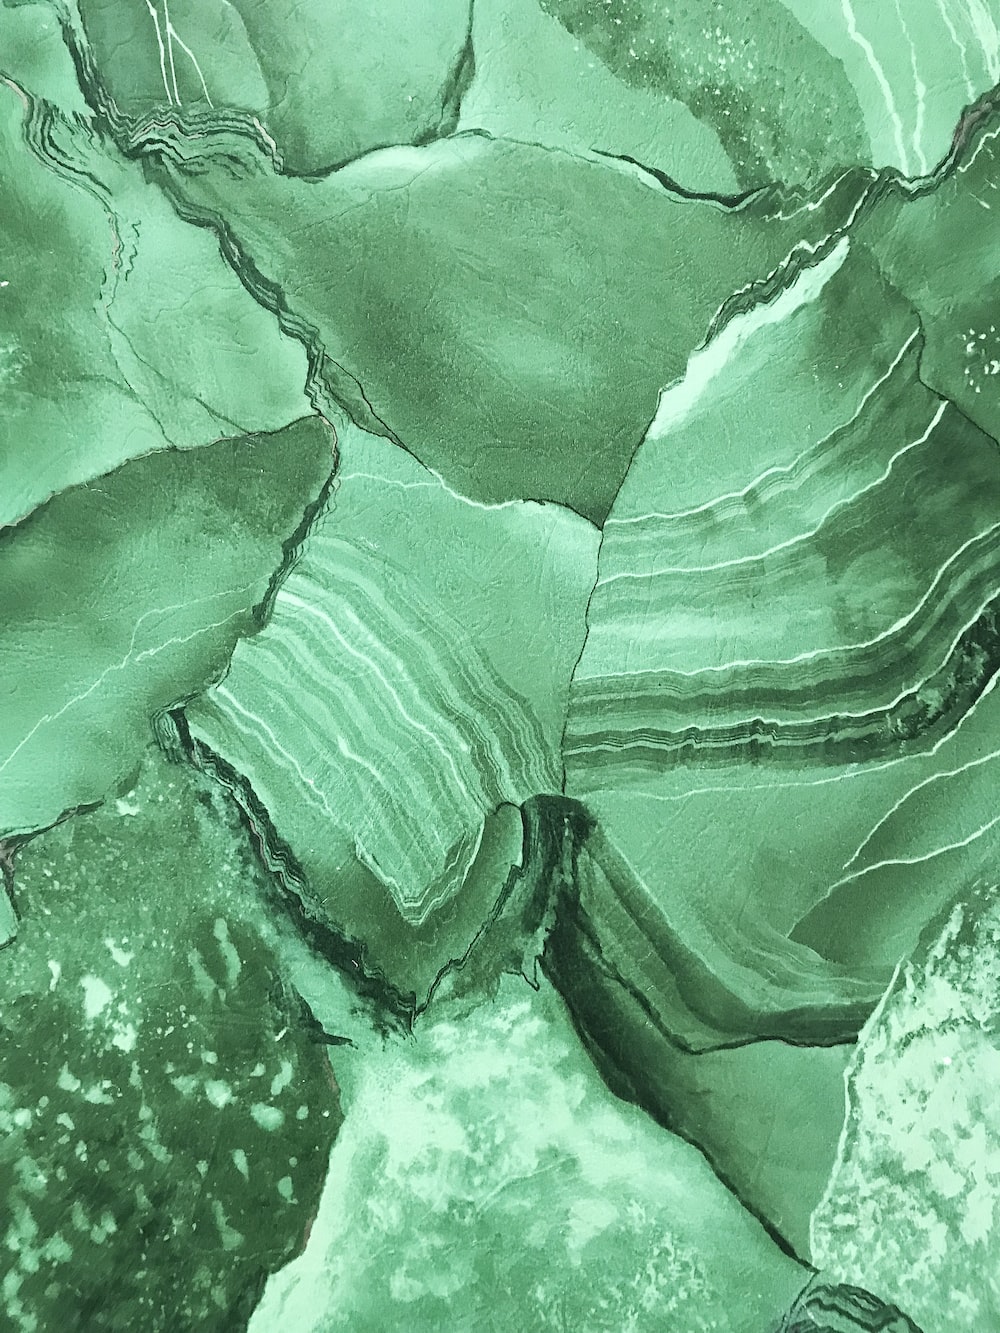 A painting of green rocks on the ground - Lime green, light green, dark green